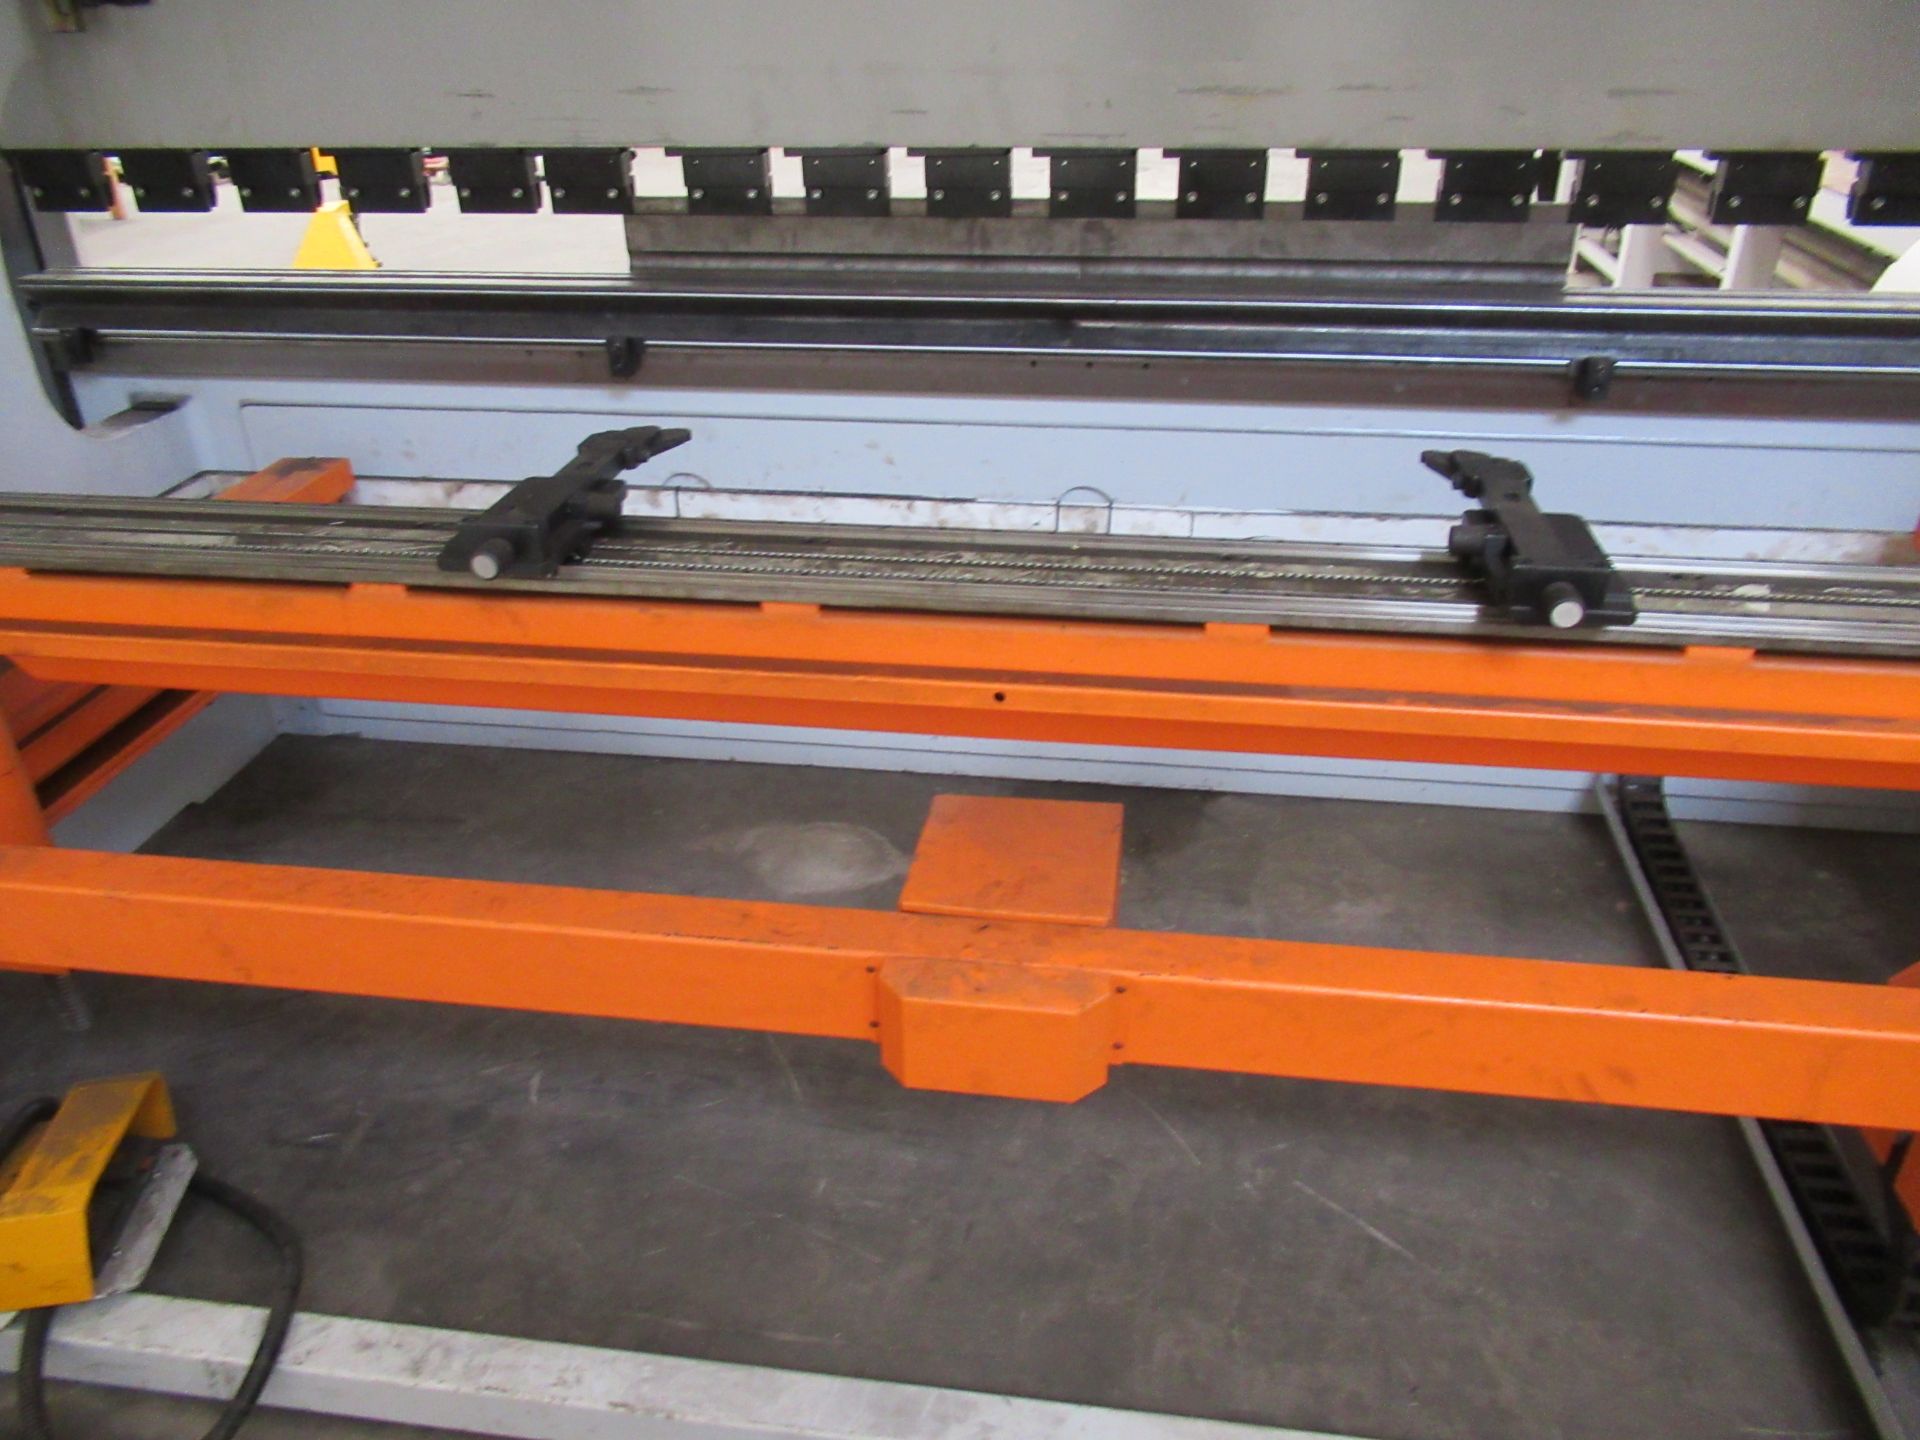 Ermaksan Speed-bend Pro 4100 x 220 CNC Hydraulic Press Brake and a selection of tooling for press br - Image 7 of 16